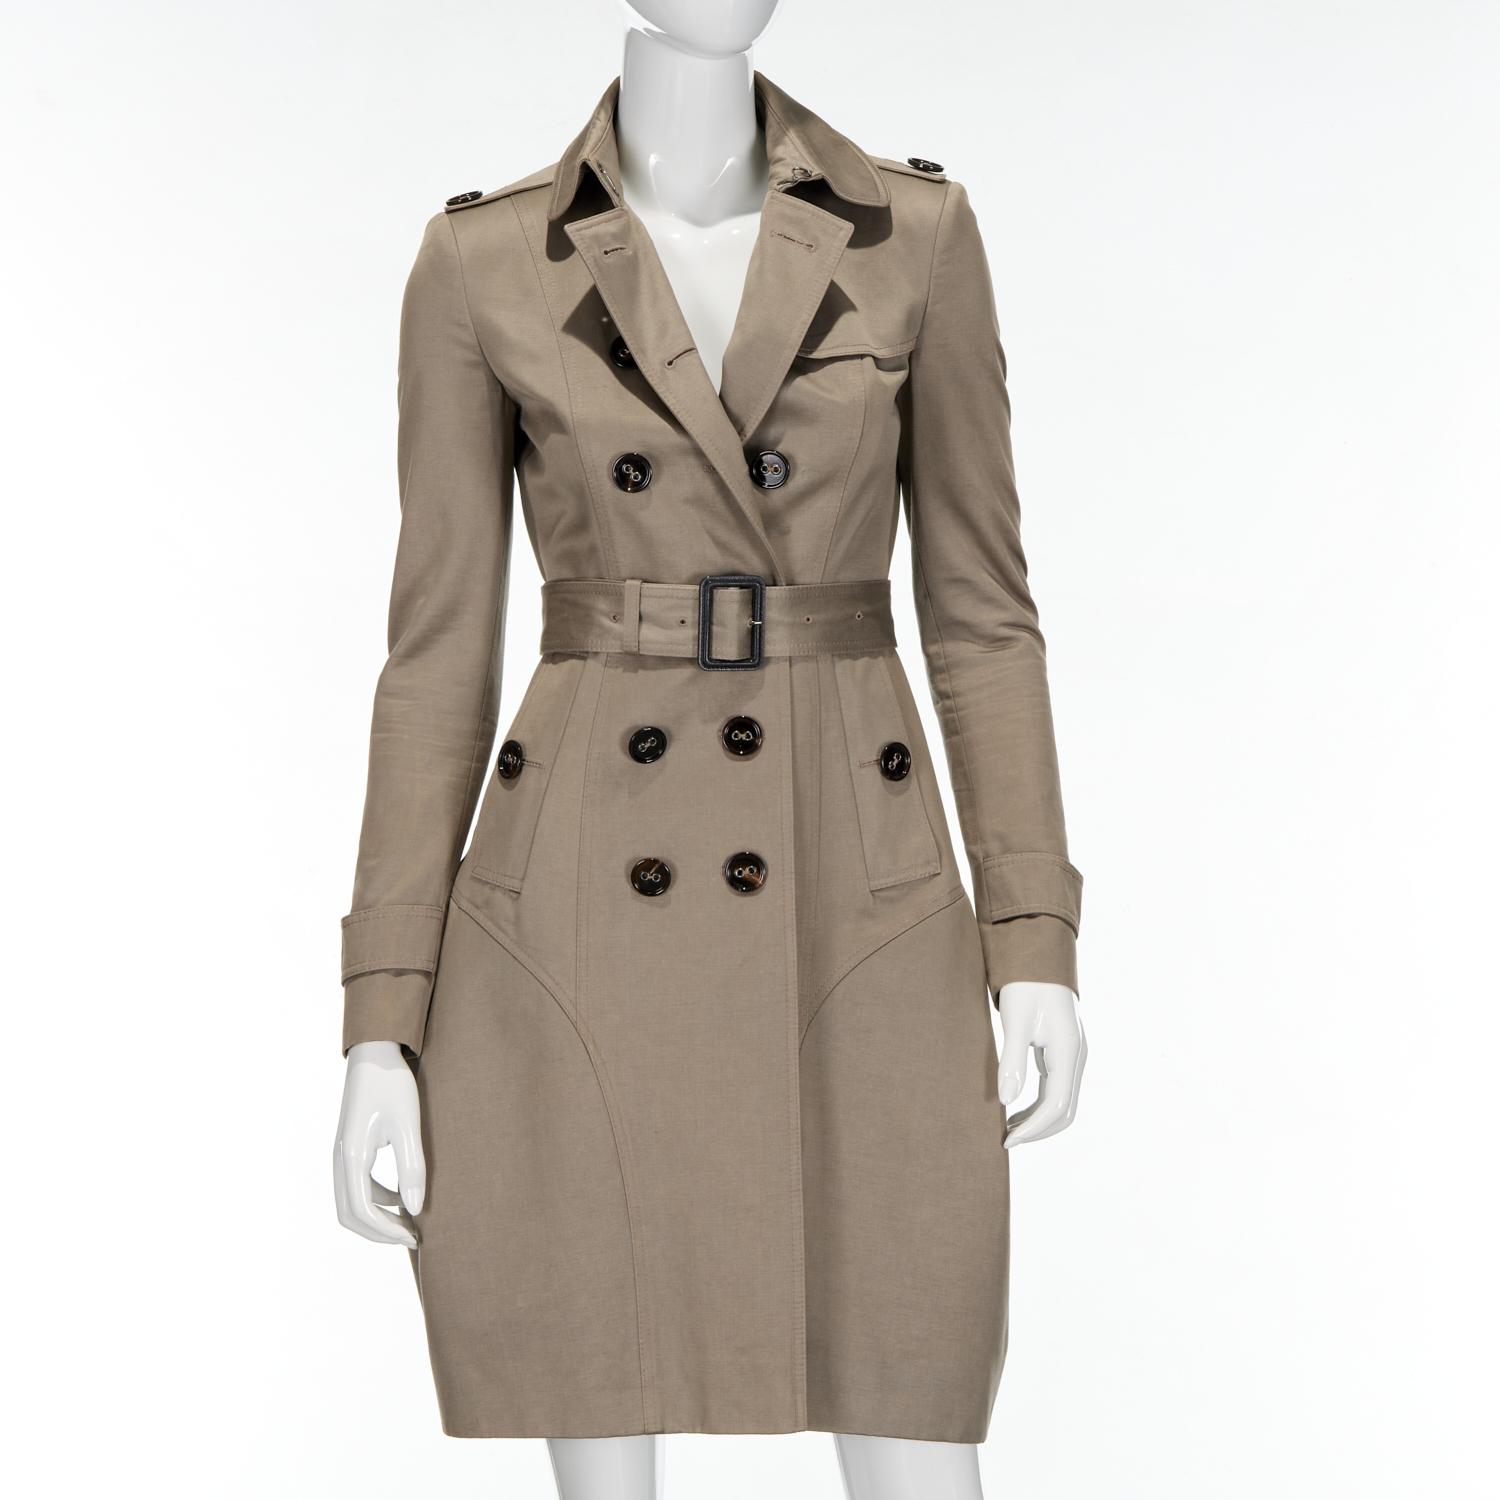 Burberry belted trench coat, modelo 608 | Millea Brothers